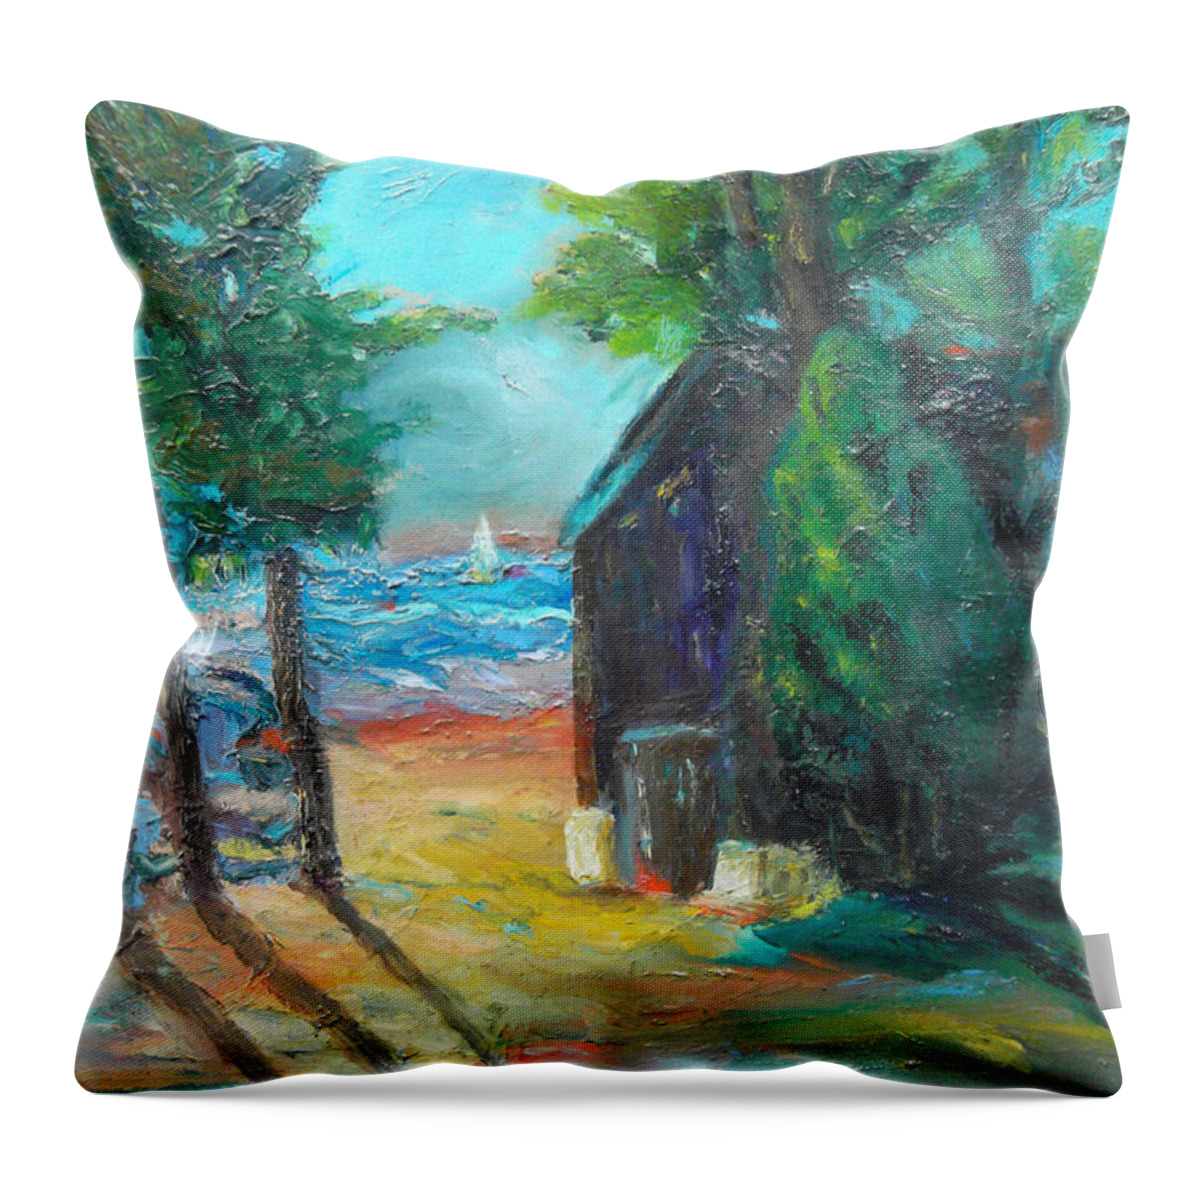 Impressionistic Throw Pillow featuring the painting The Lake House by Susan Esbensen